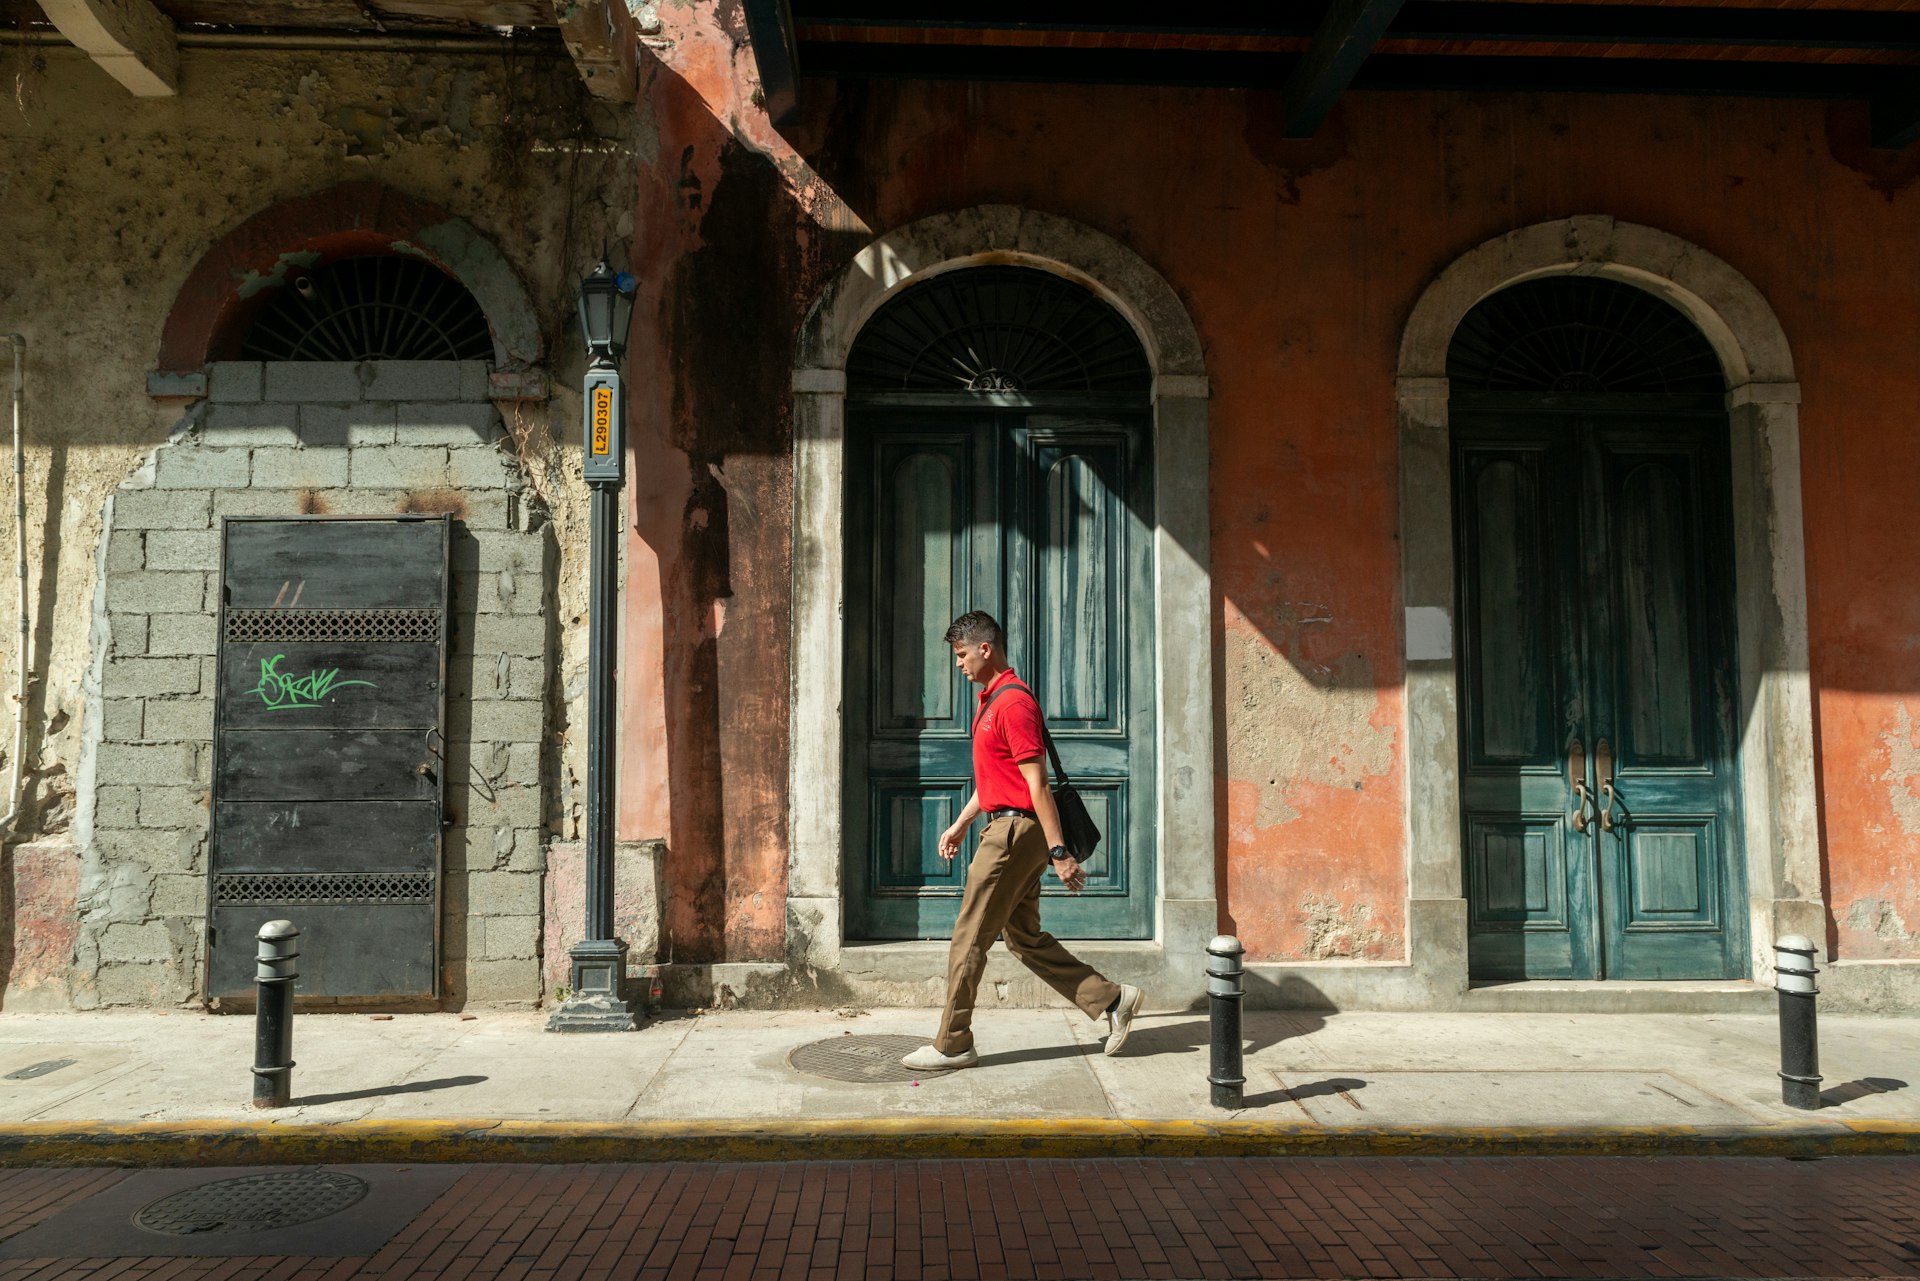 A young man walks by the doorways in a historic facade in Casco Viejo, Panama City, Panama